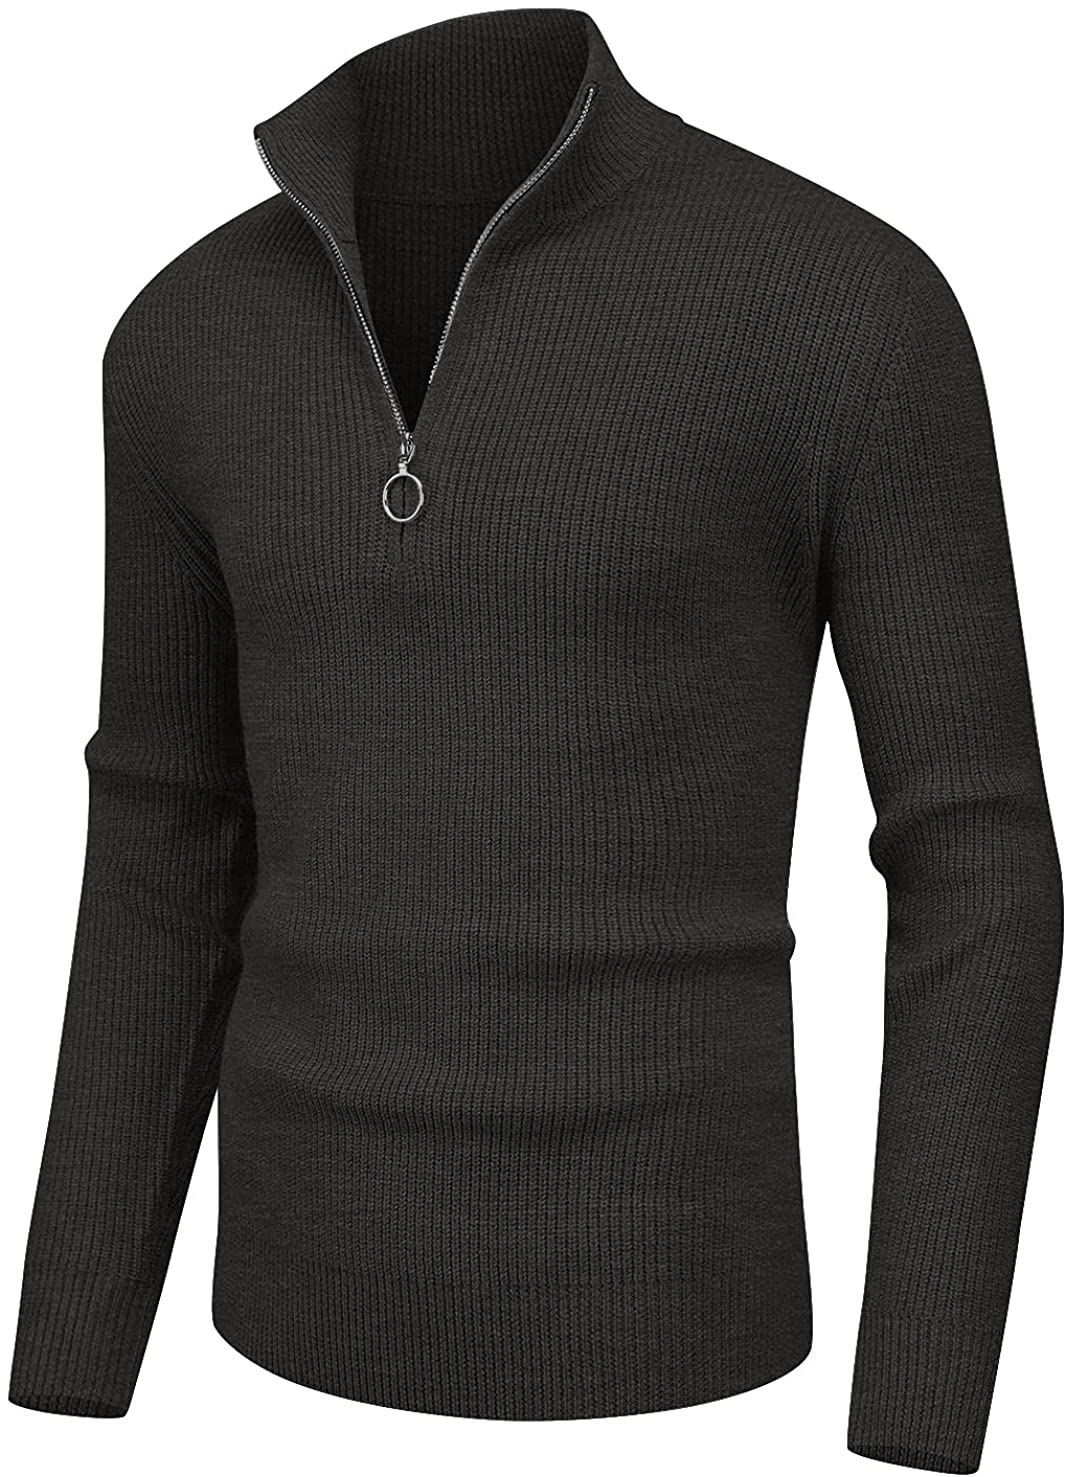 V neck sweaters: How to match v neck sweaters插图3